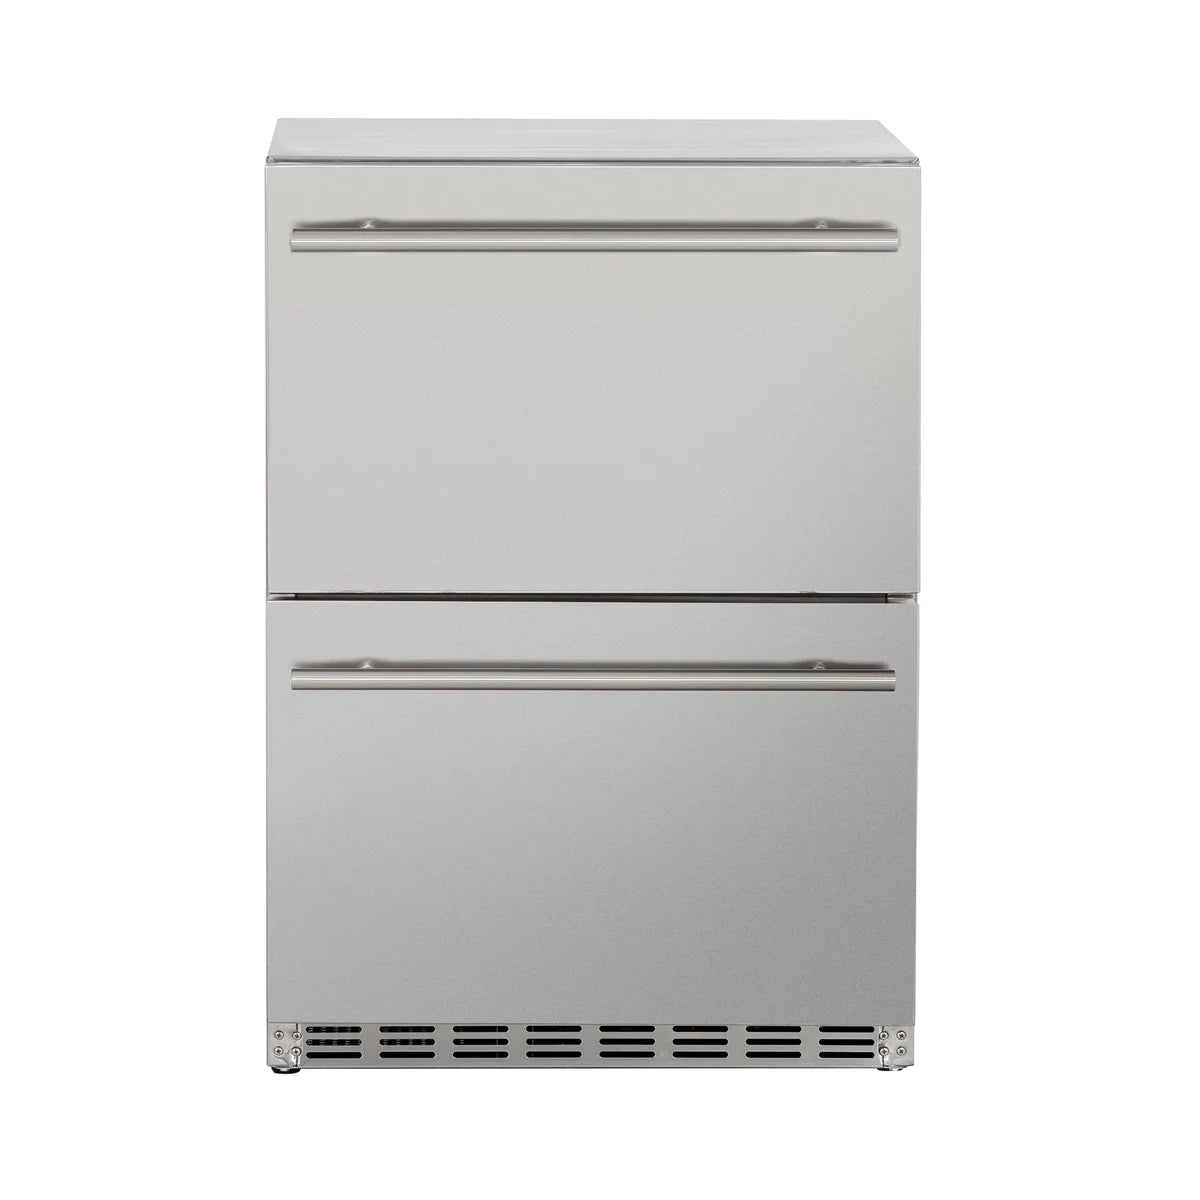 Deluxe Outdoor Rated 2-Drawer Refrigerator - 24" 5.3c